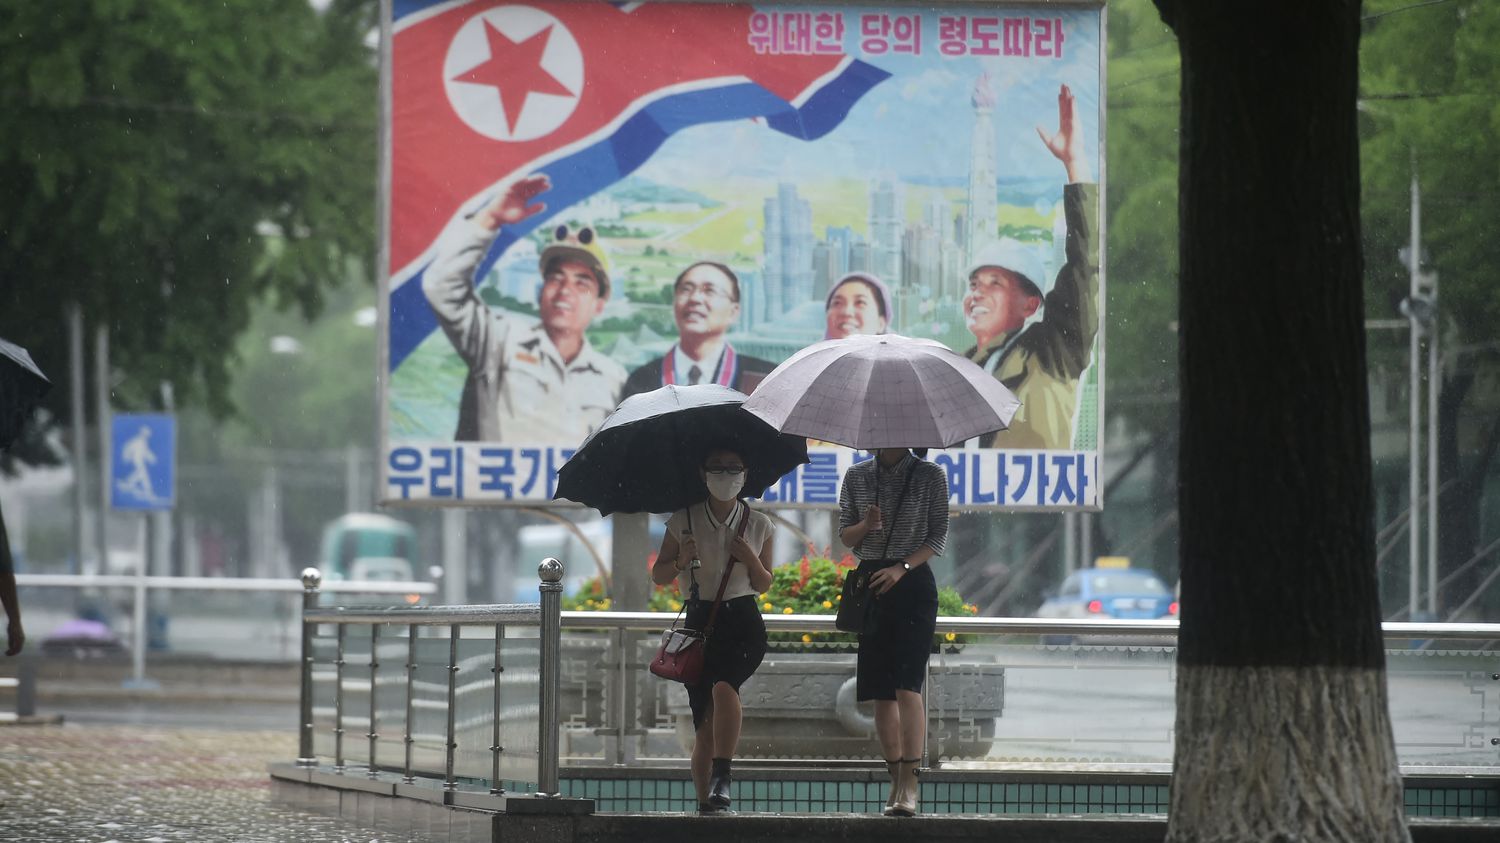 Covid-19: North Korea says all patients are 'cured'
